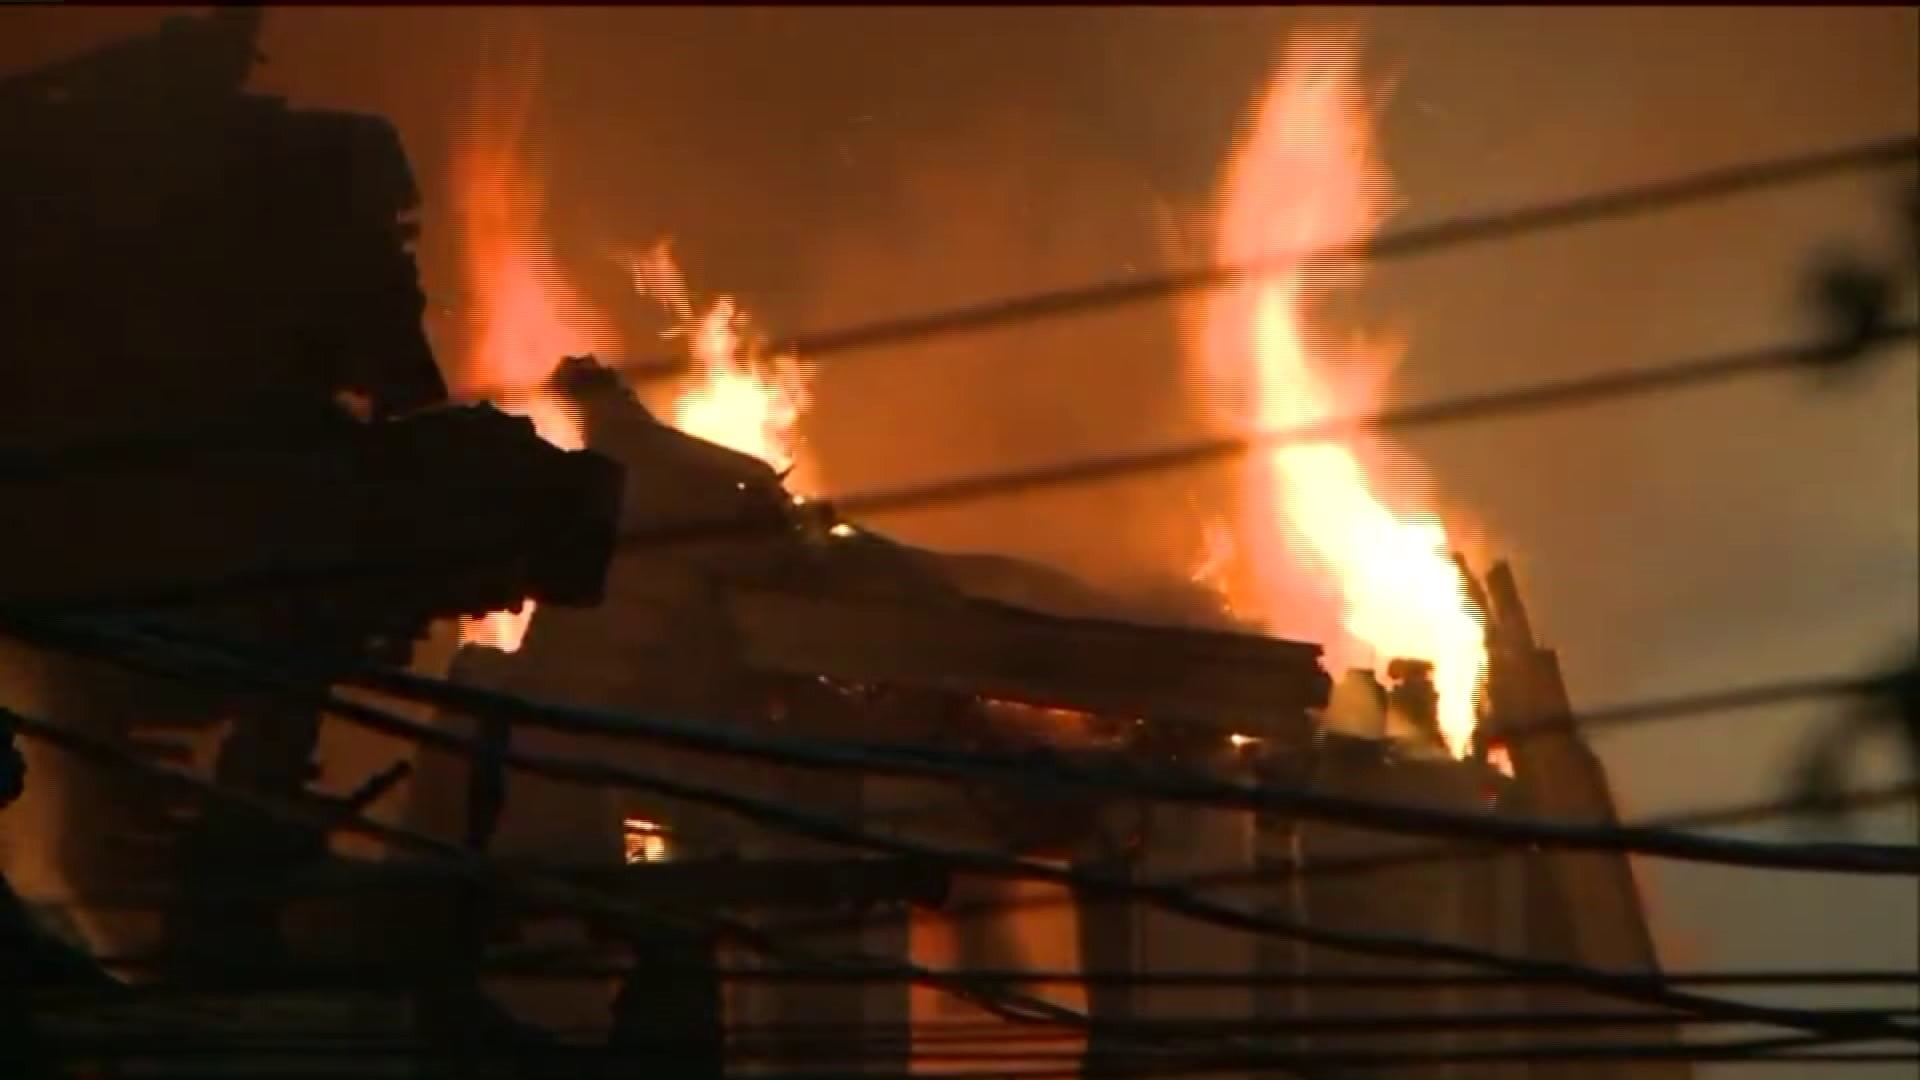 Families left with no homes following large house fire in Waterbury